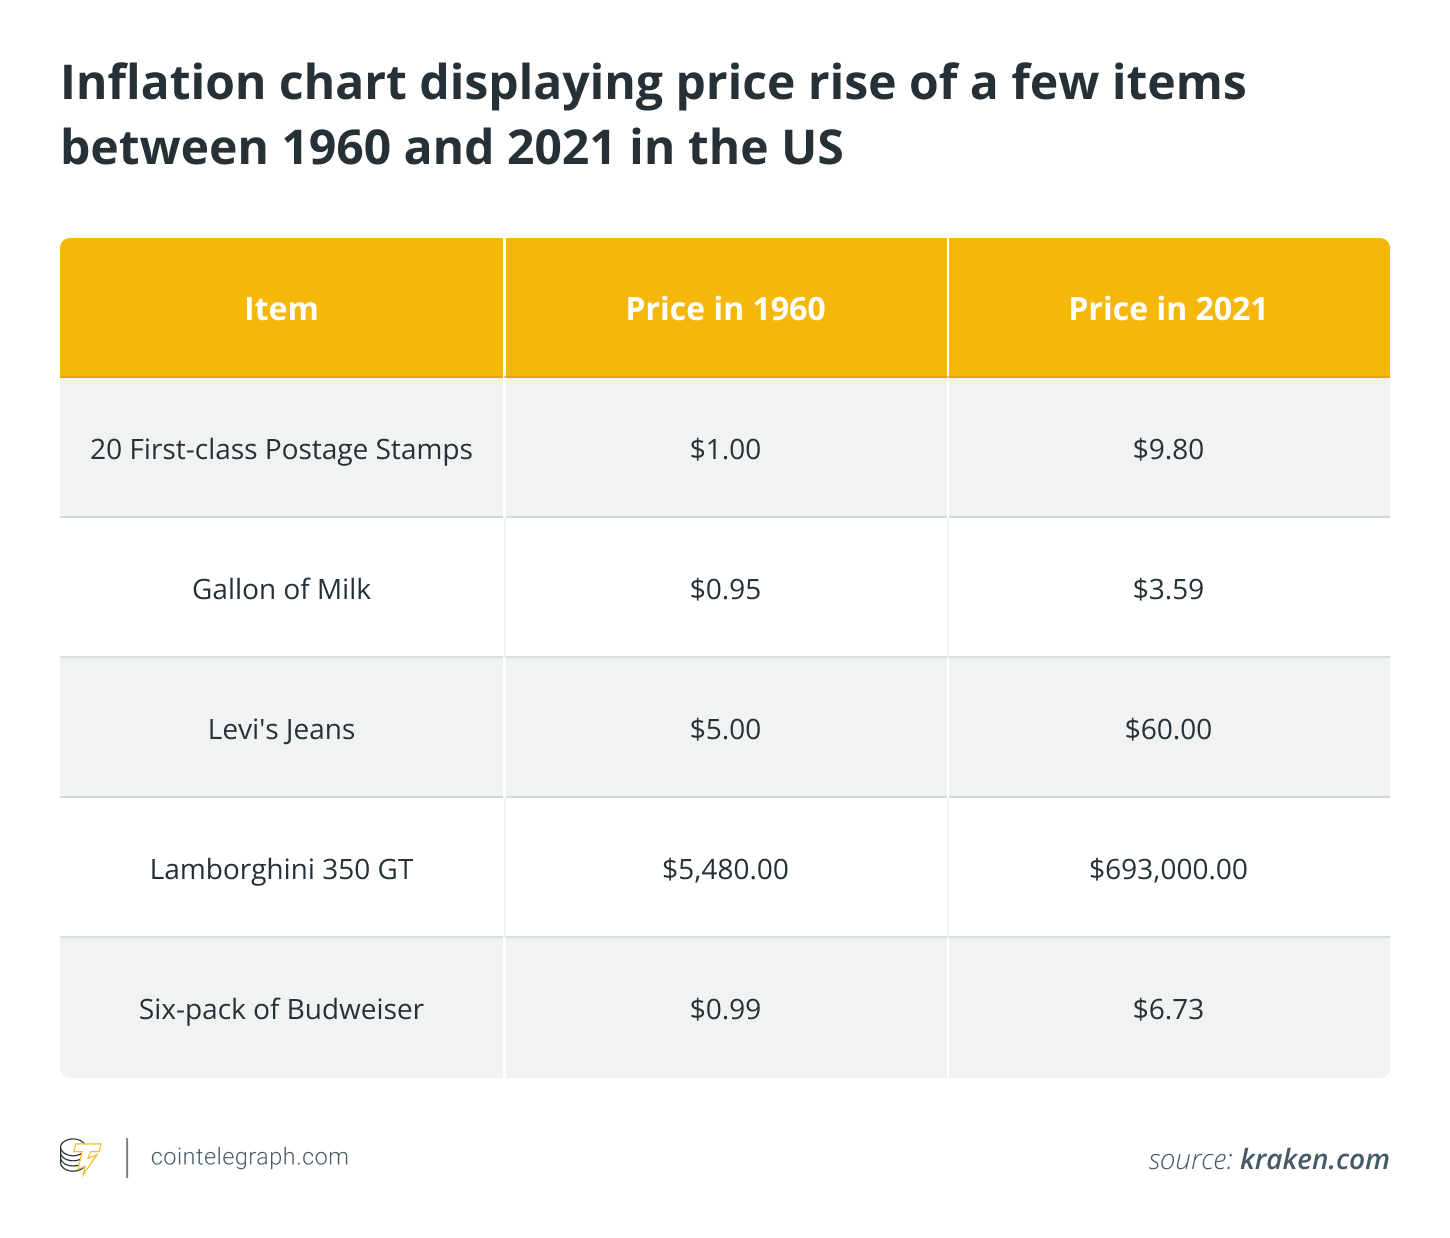 Inflation chart displaying price rise of a few items between 1960 and 2021 in the US